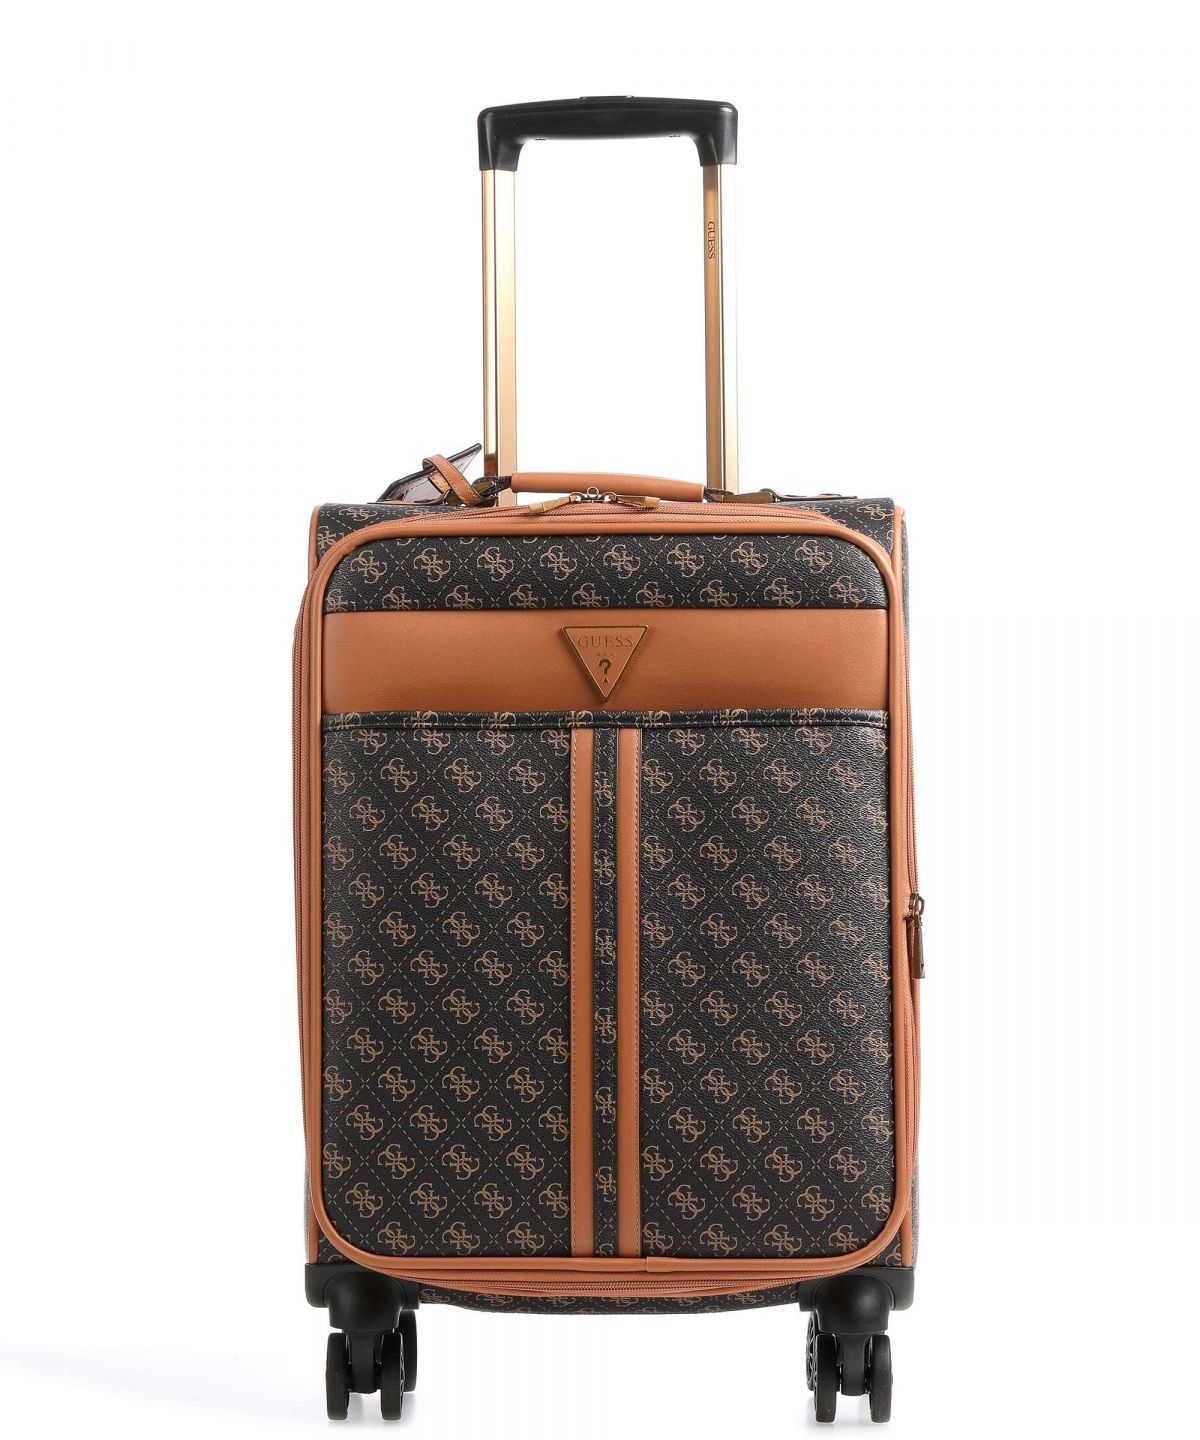 Guess trolley suitcase TWE84059830